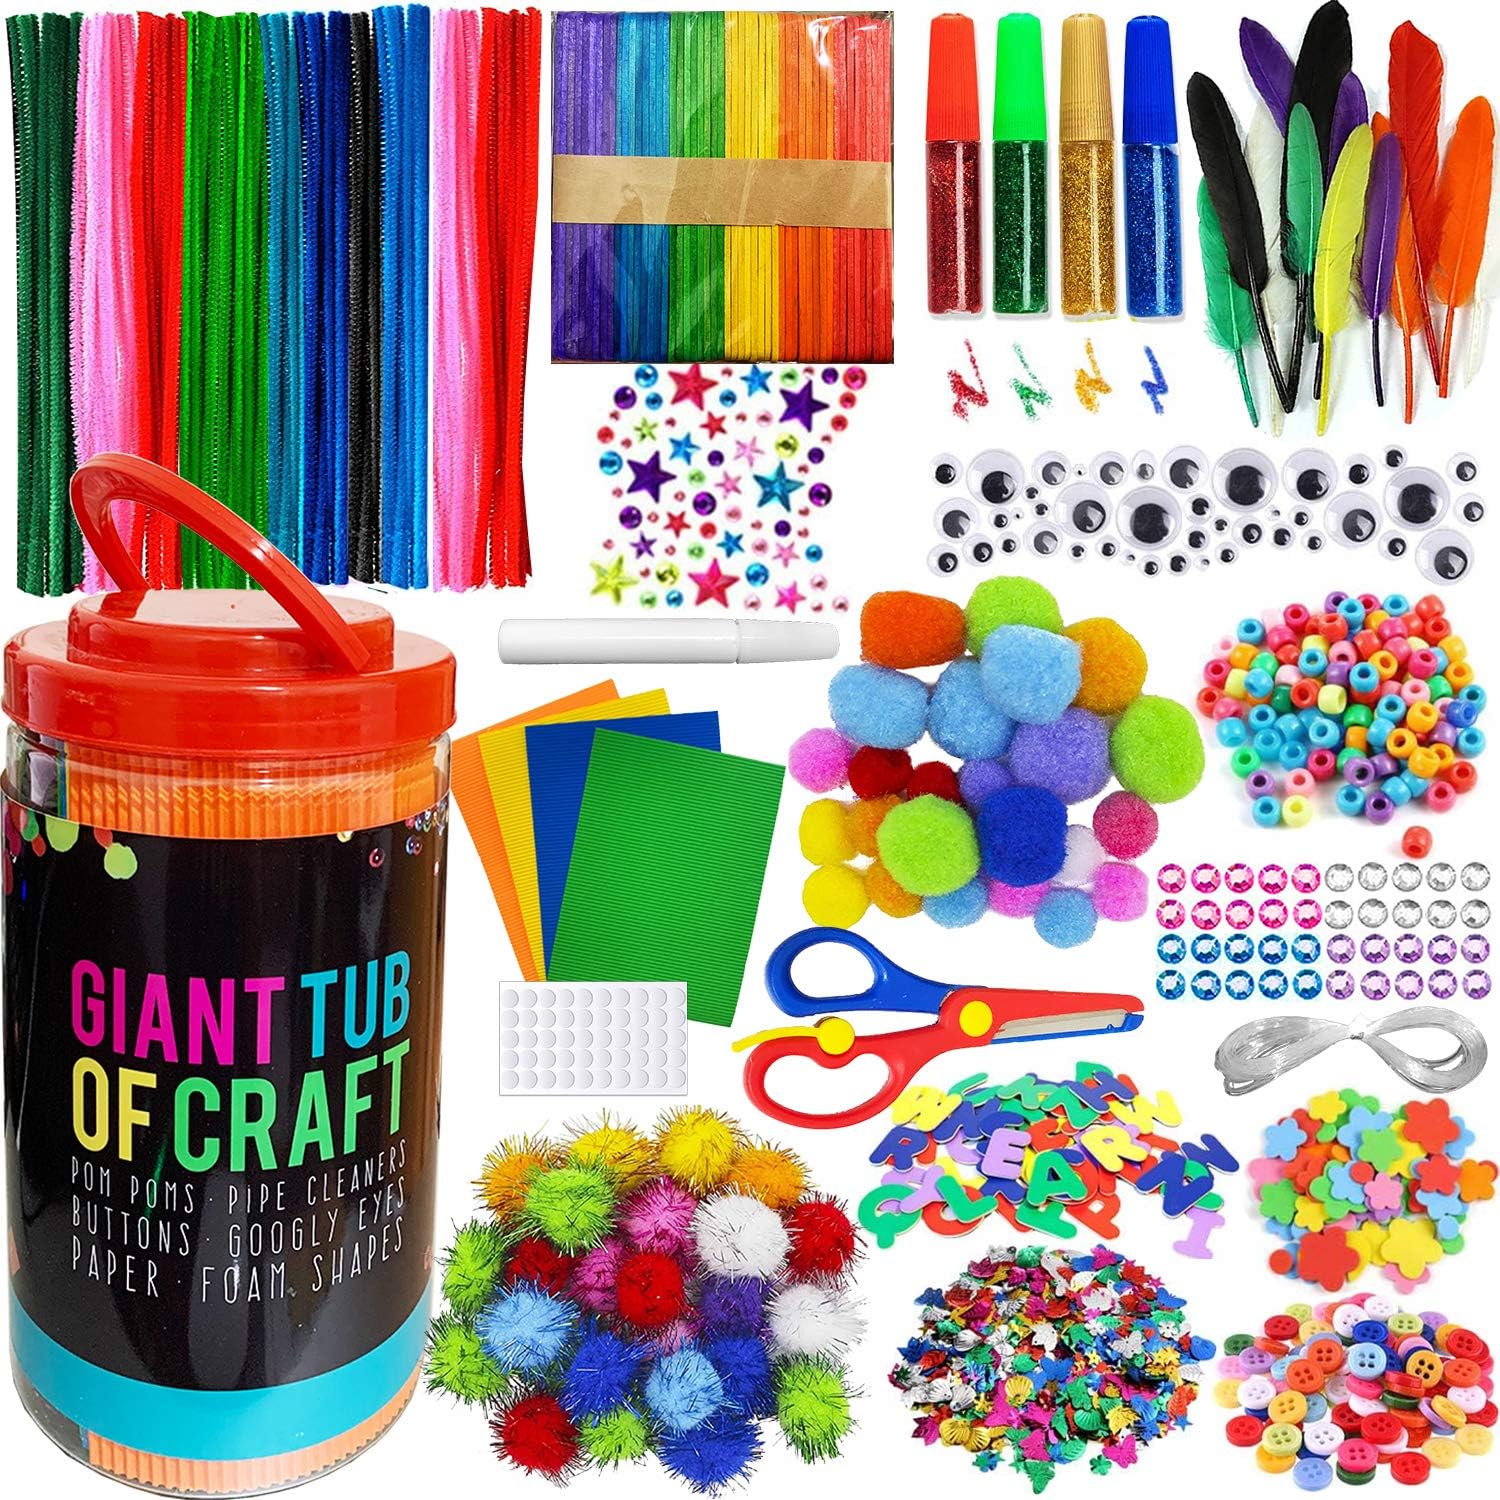 MOISO Kids Crafts and Art Supplies Jar Kit - 550+ Piece Set - Plus Glitter Glue, Construction Paper, Colored Popsicle Sticks, Eyes, Pipe Cleaners $26.93